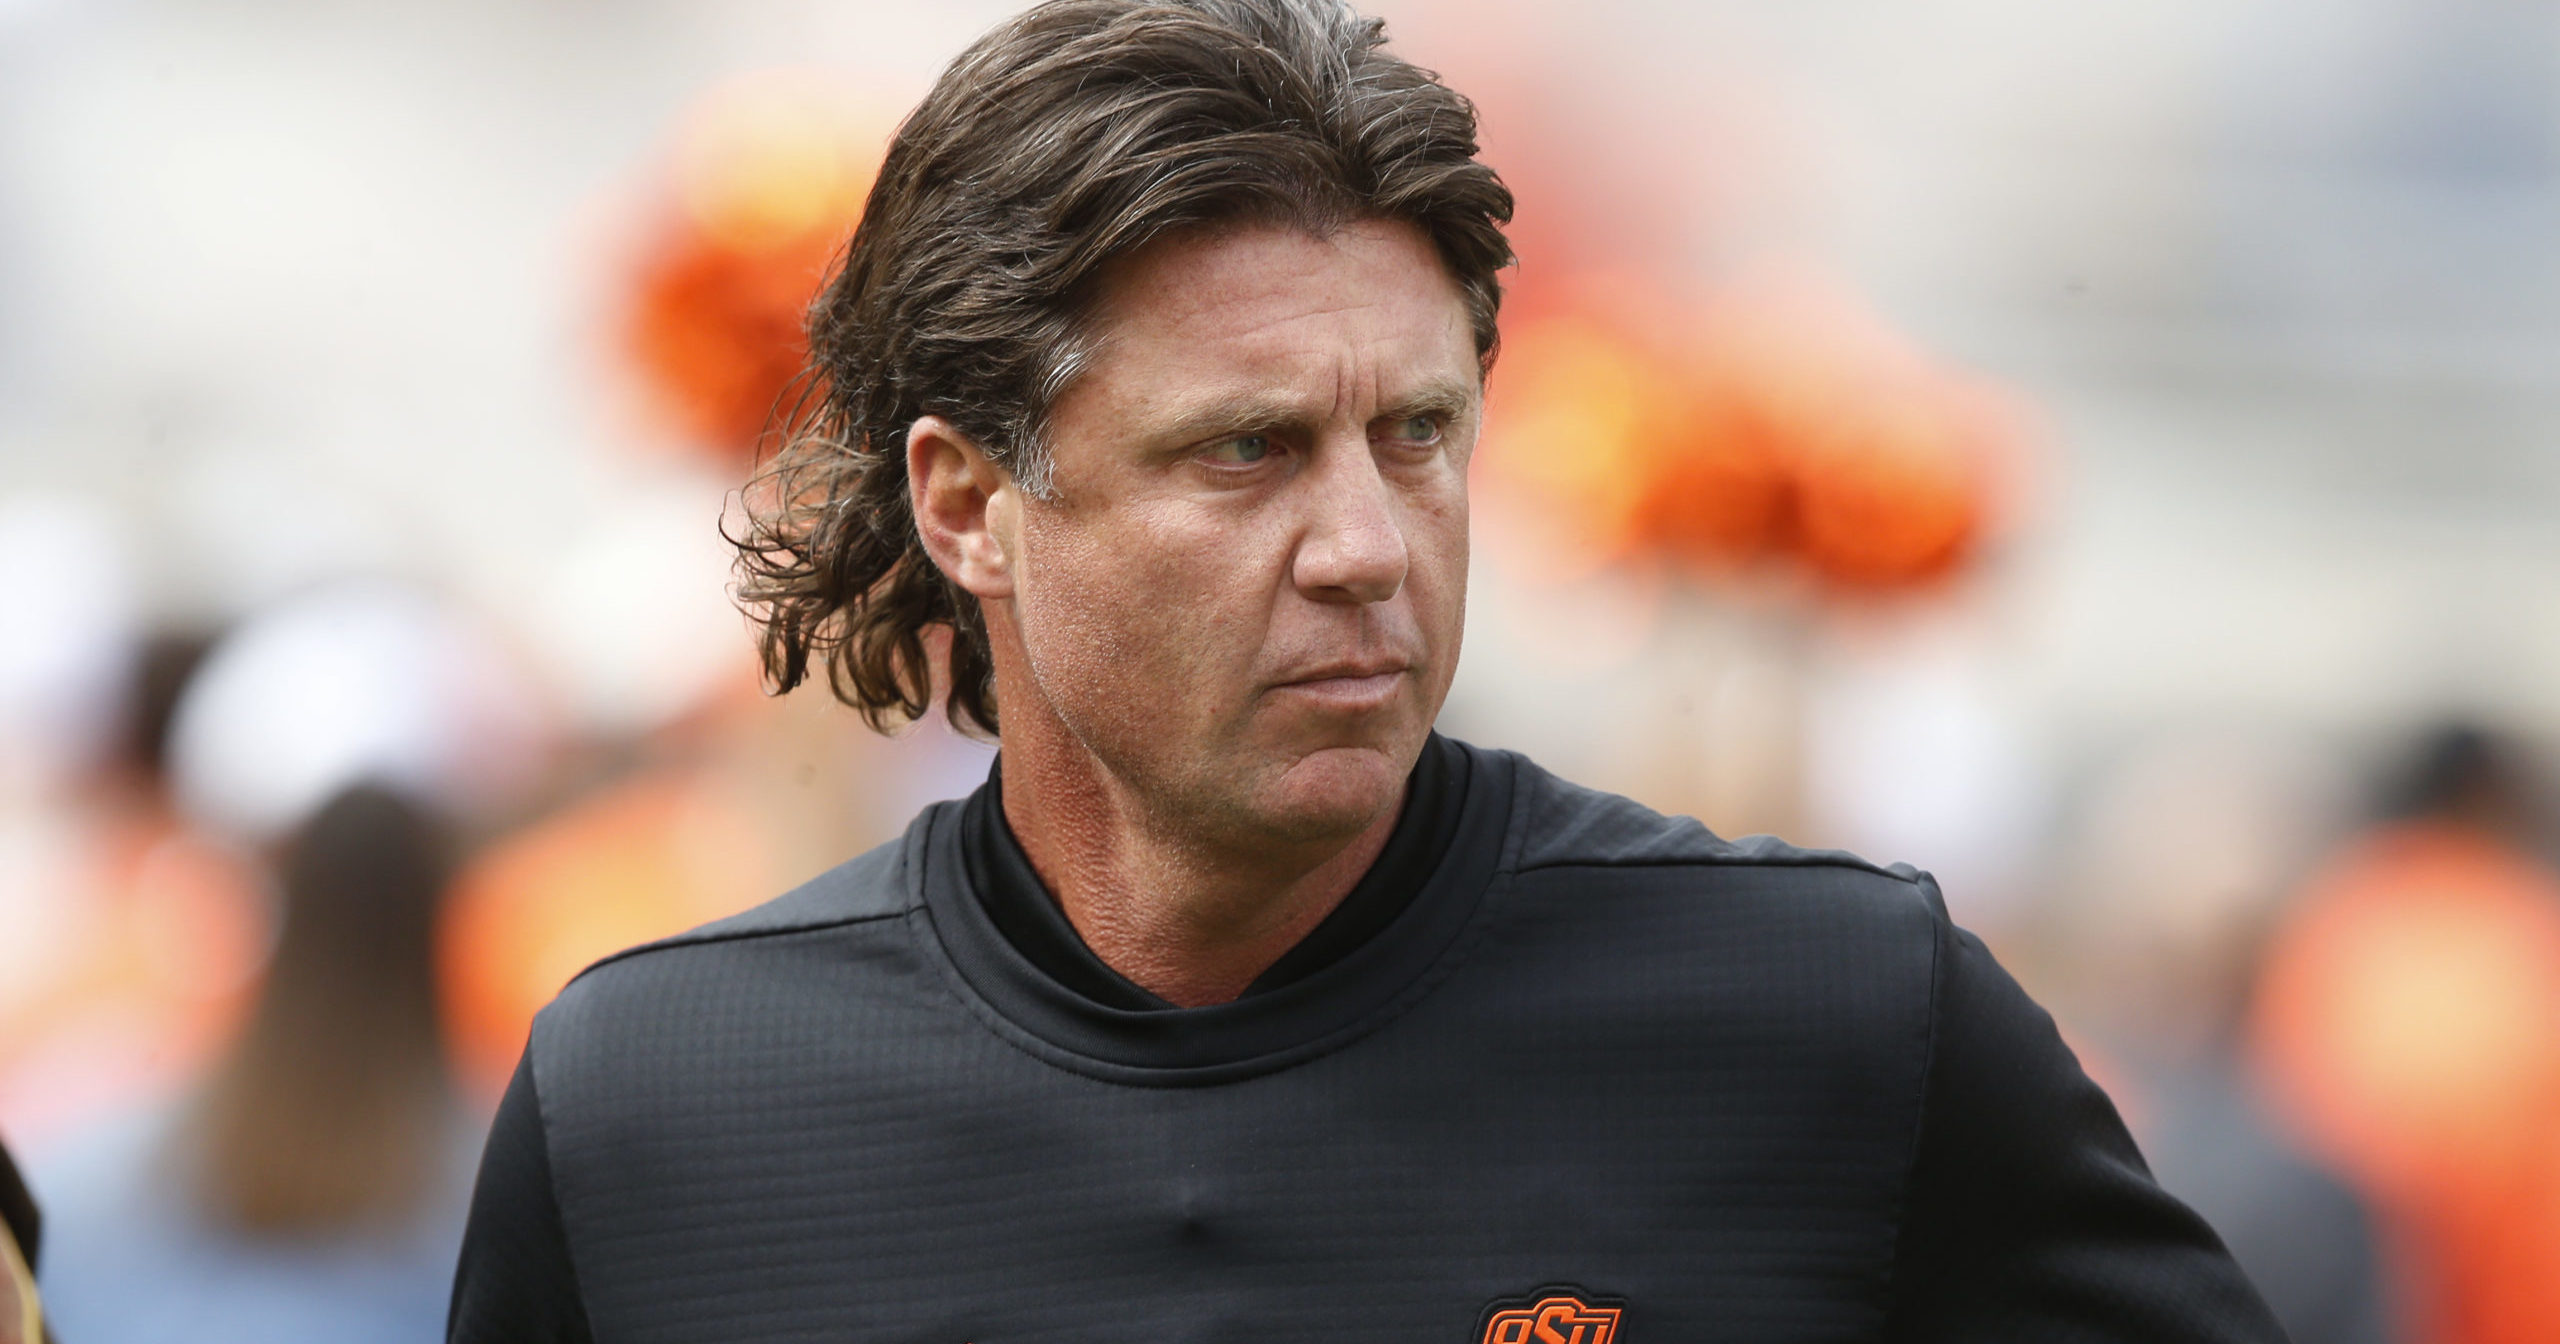 In this Oct. 6, 2018, file photo, Oklahoma State football coach Mike Gundy runs onto the field before the team's game against Iowa State in Stillwater, Oklahoma. Mike Holder, Oklahoma State’s athletic director, said on July 2, 2020, that an internal review had found “no sign or indication of racism” in the football program under Gundy.